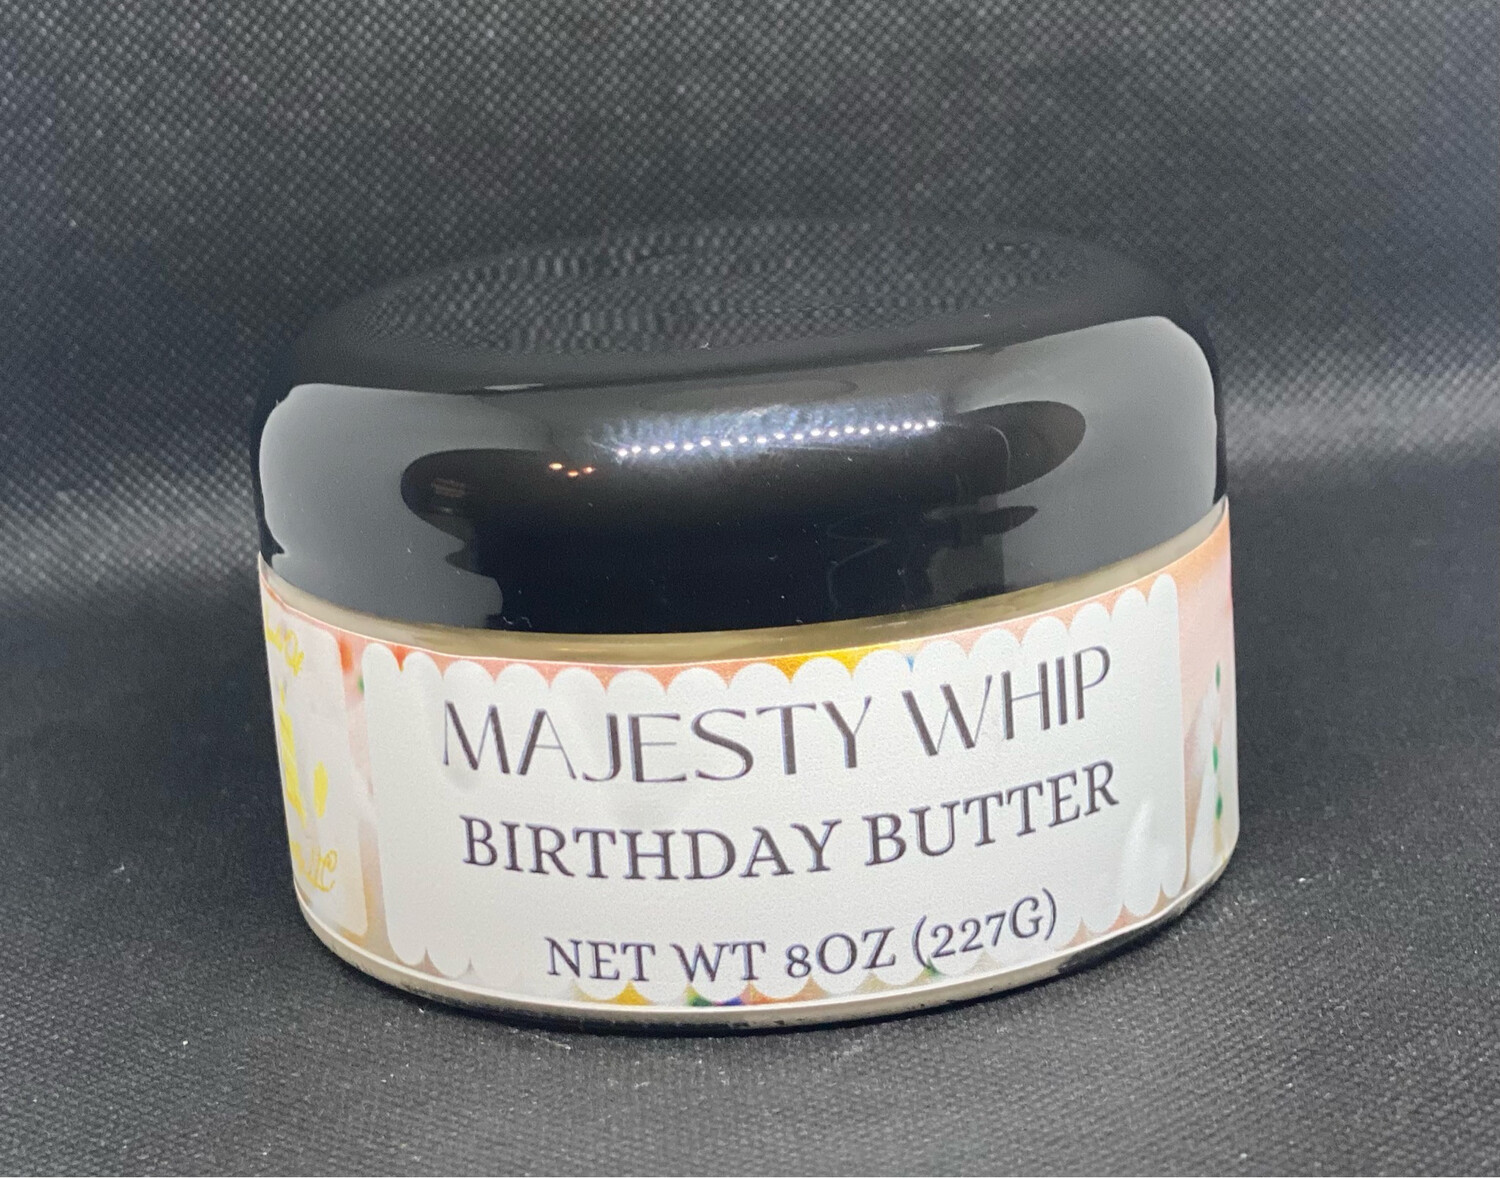 Birthday Butter Majesty Whip